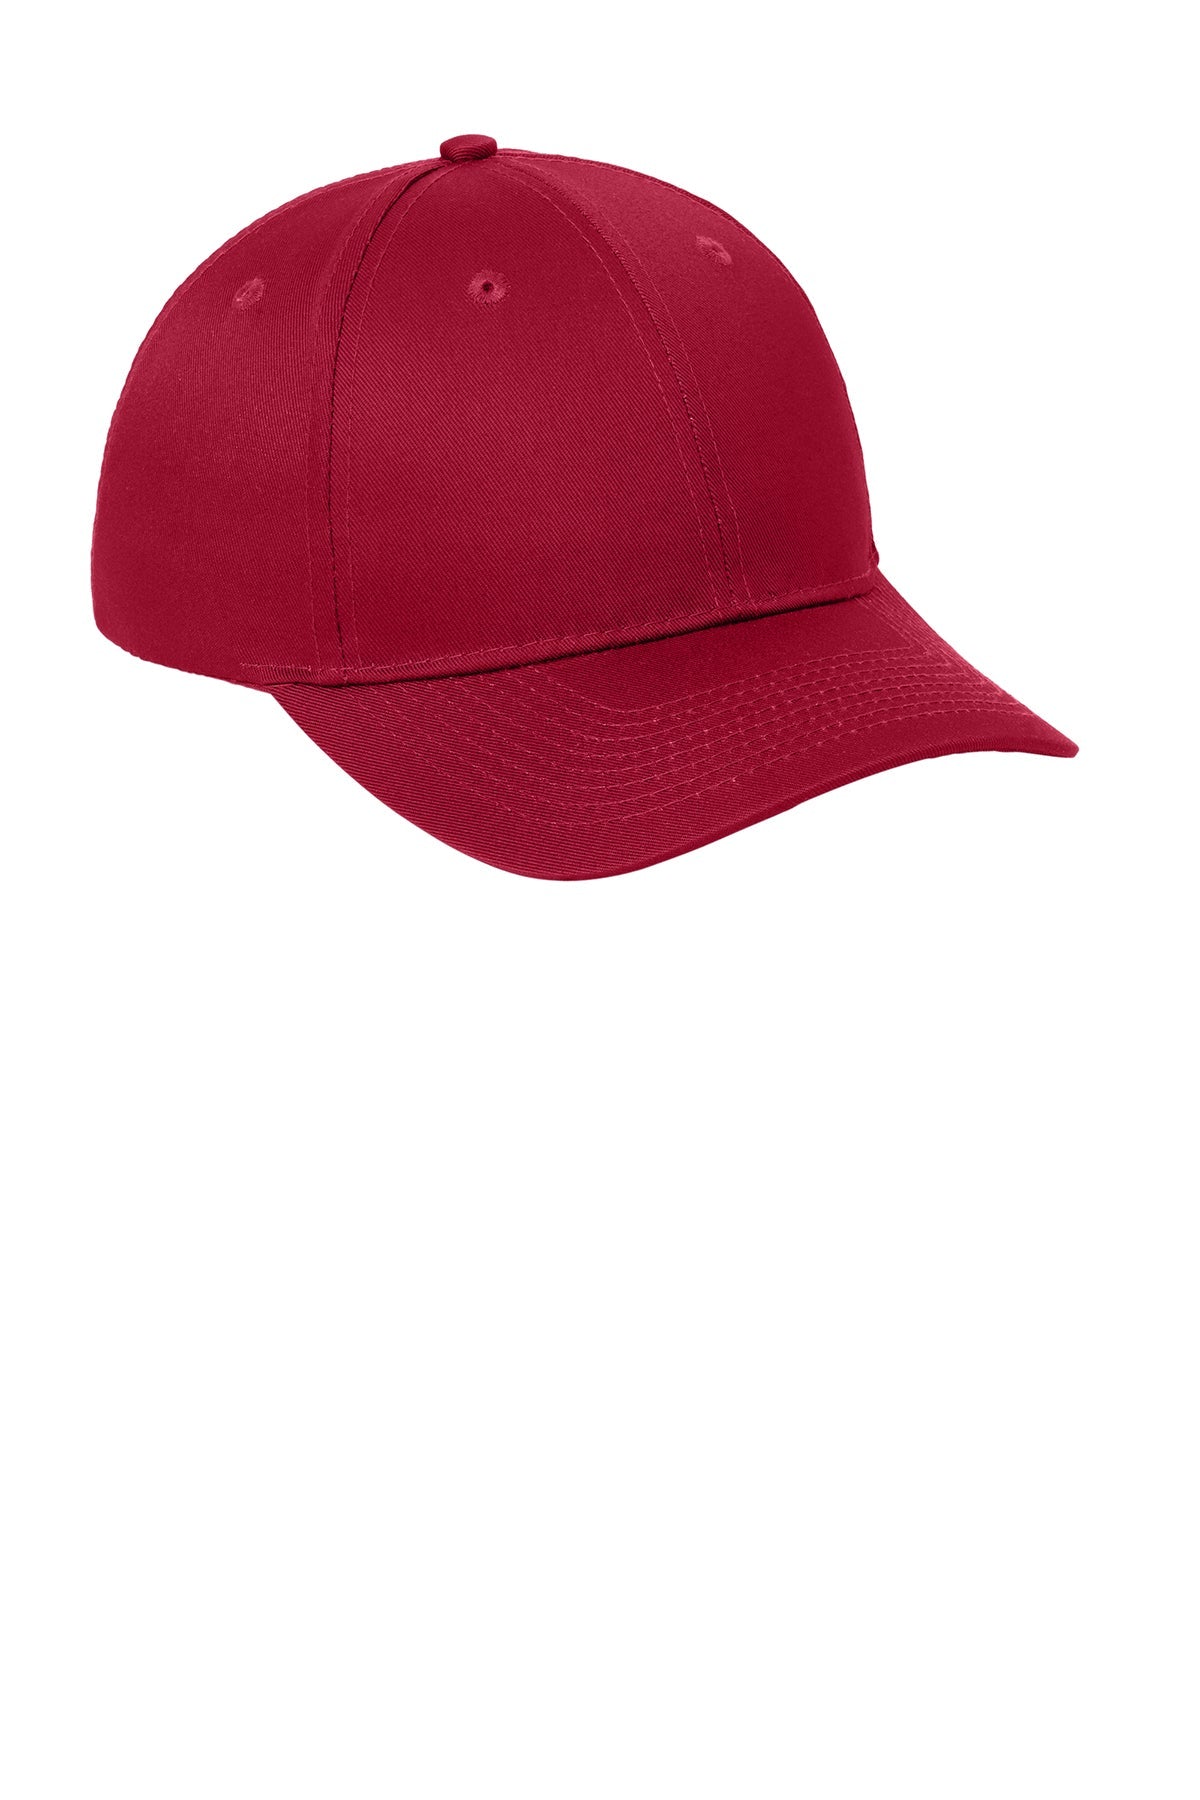 Port Authority Uniforming Branded Twill Caps, Red